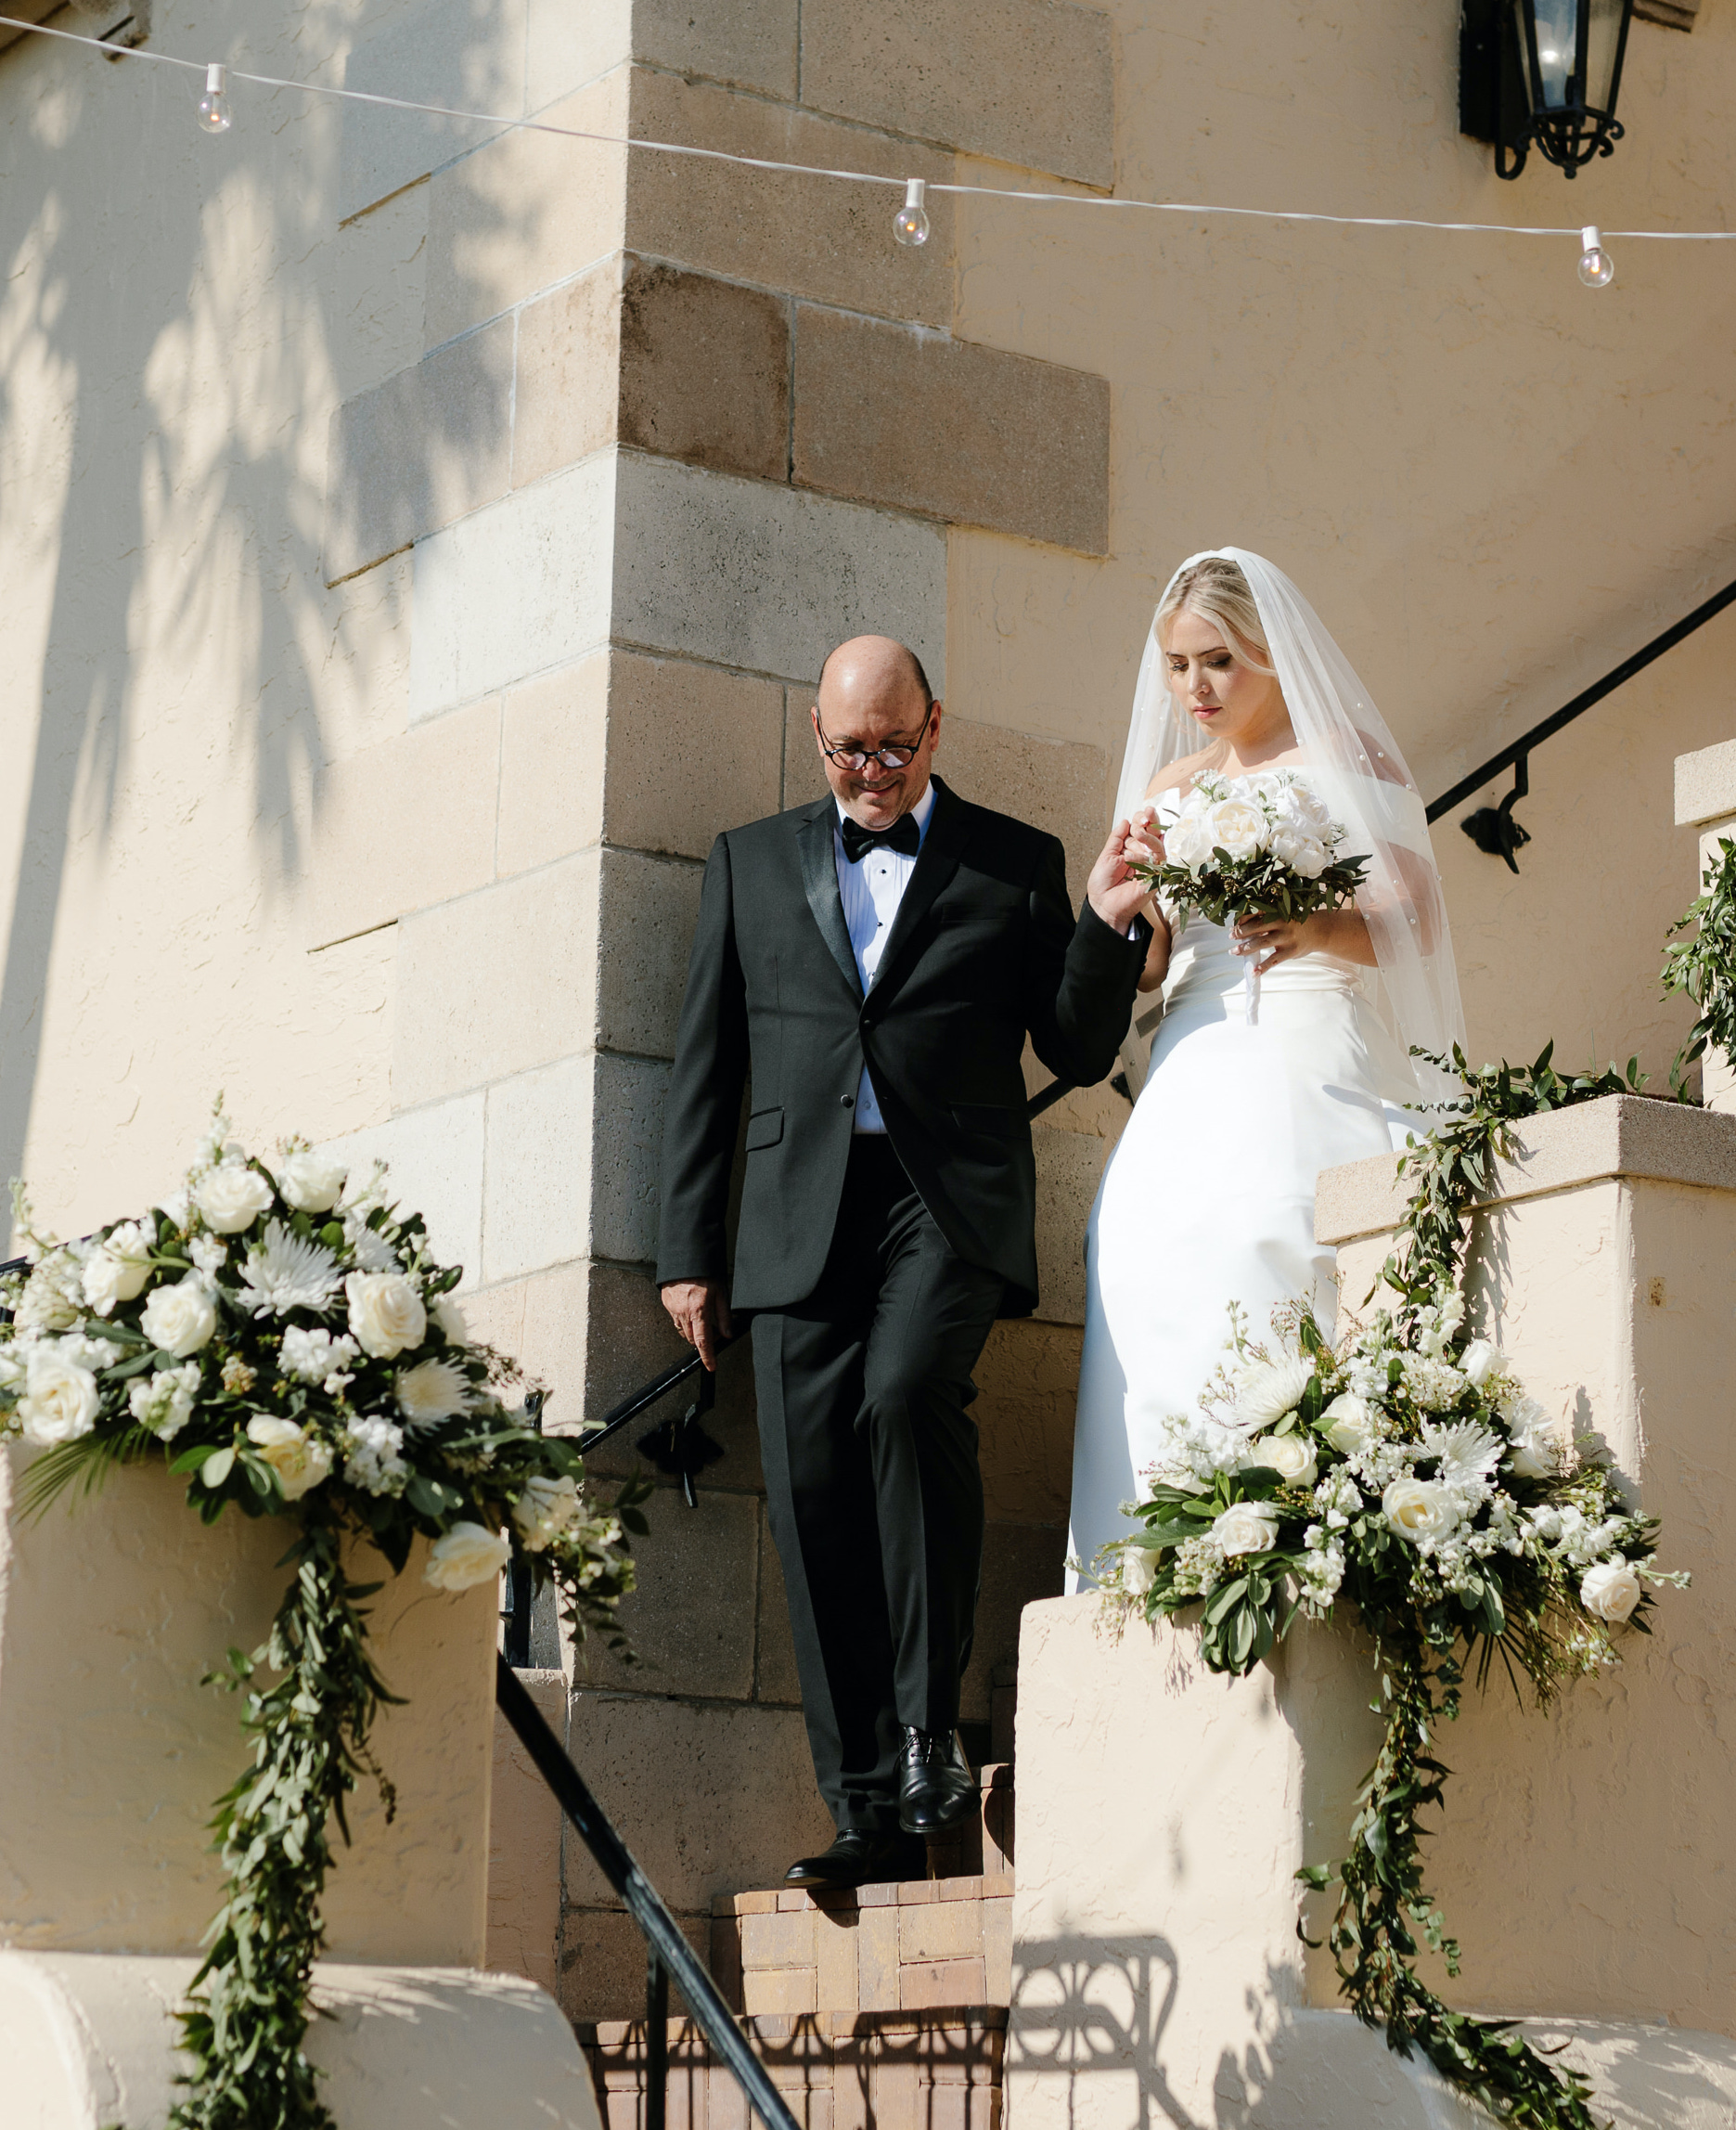 Father of the bride walks a bride down a flight of stairs at the Powel Crosley Estate in Sarasota Florida.